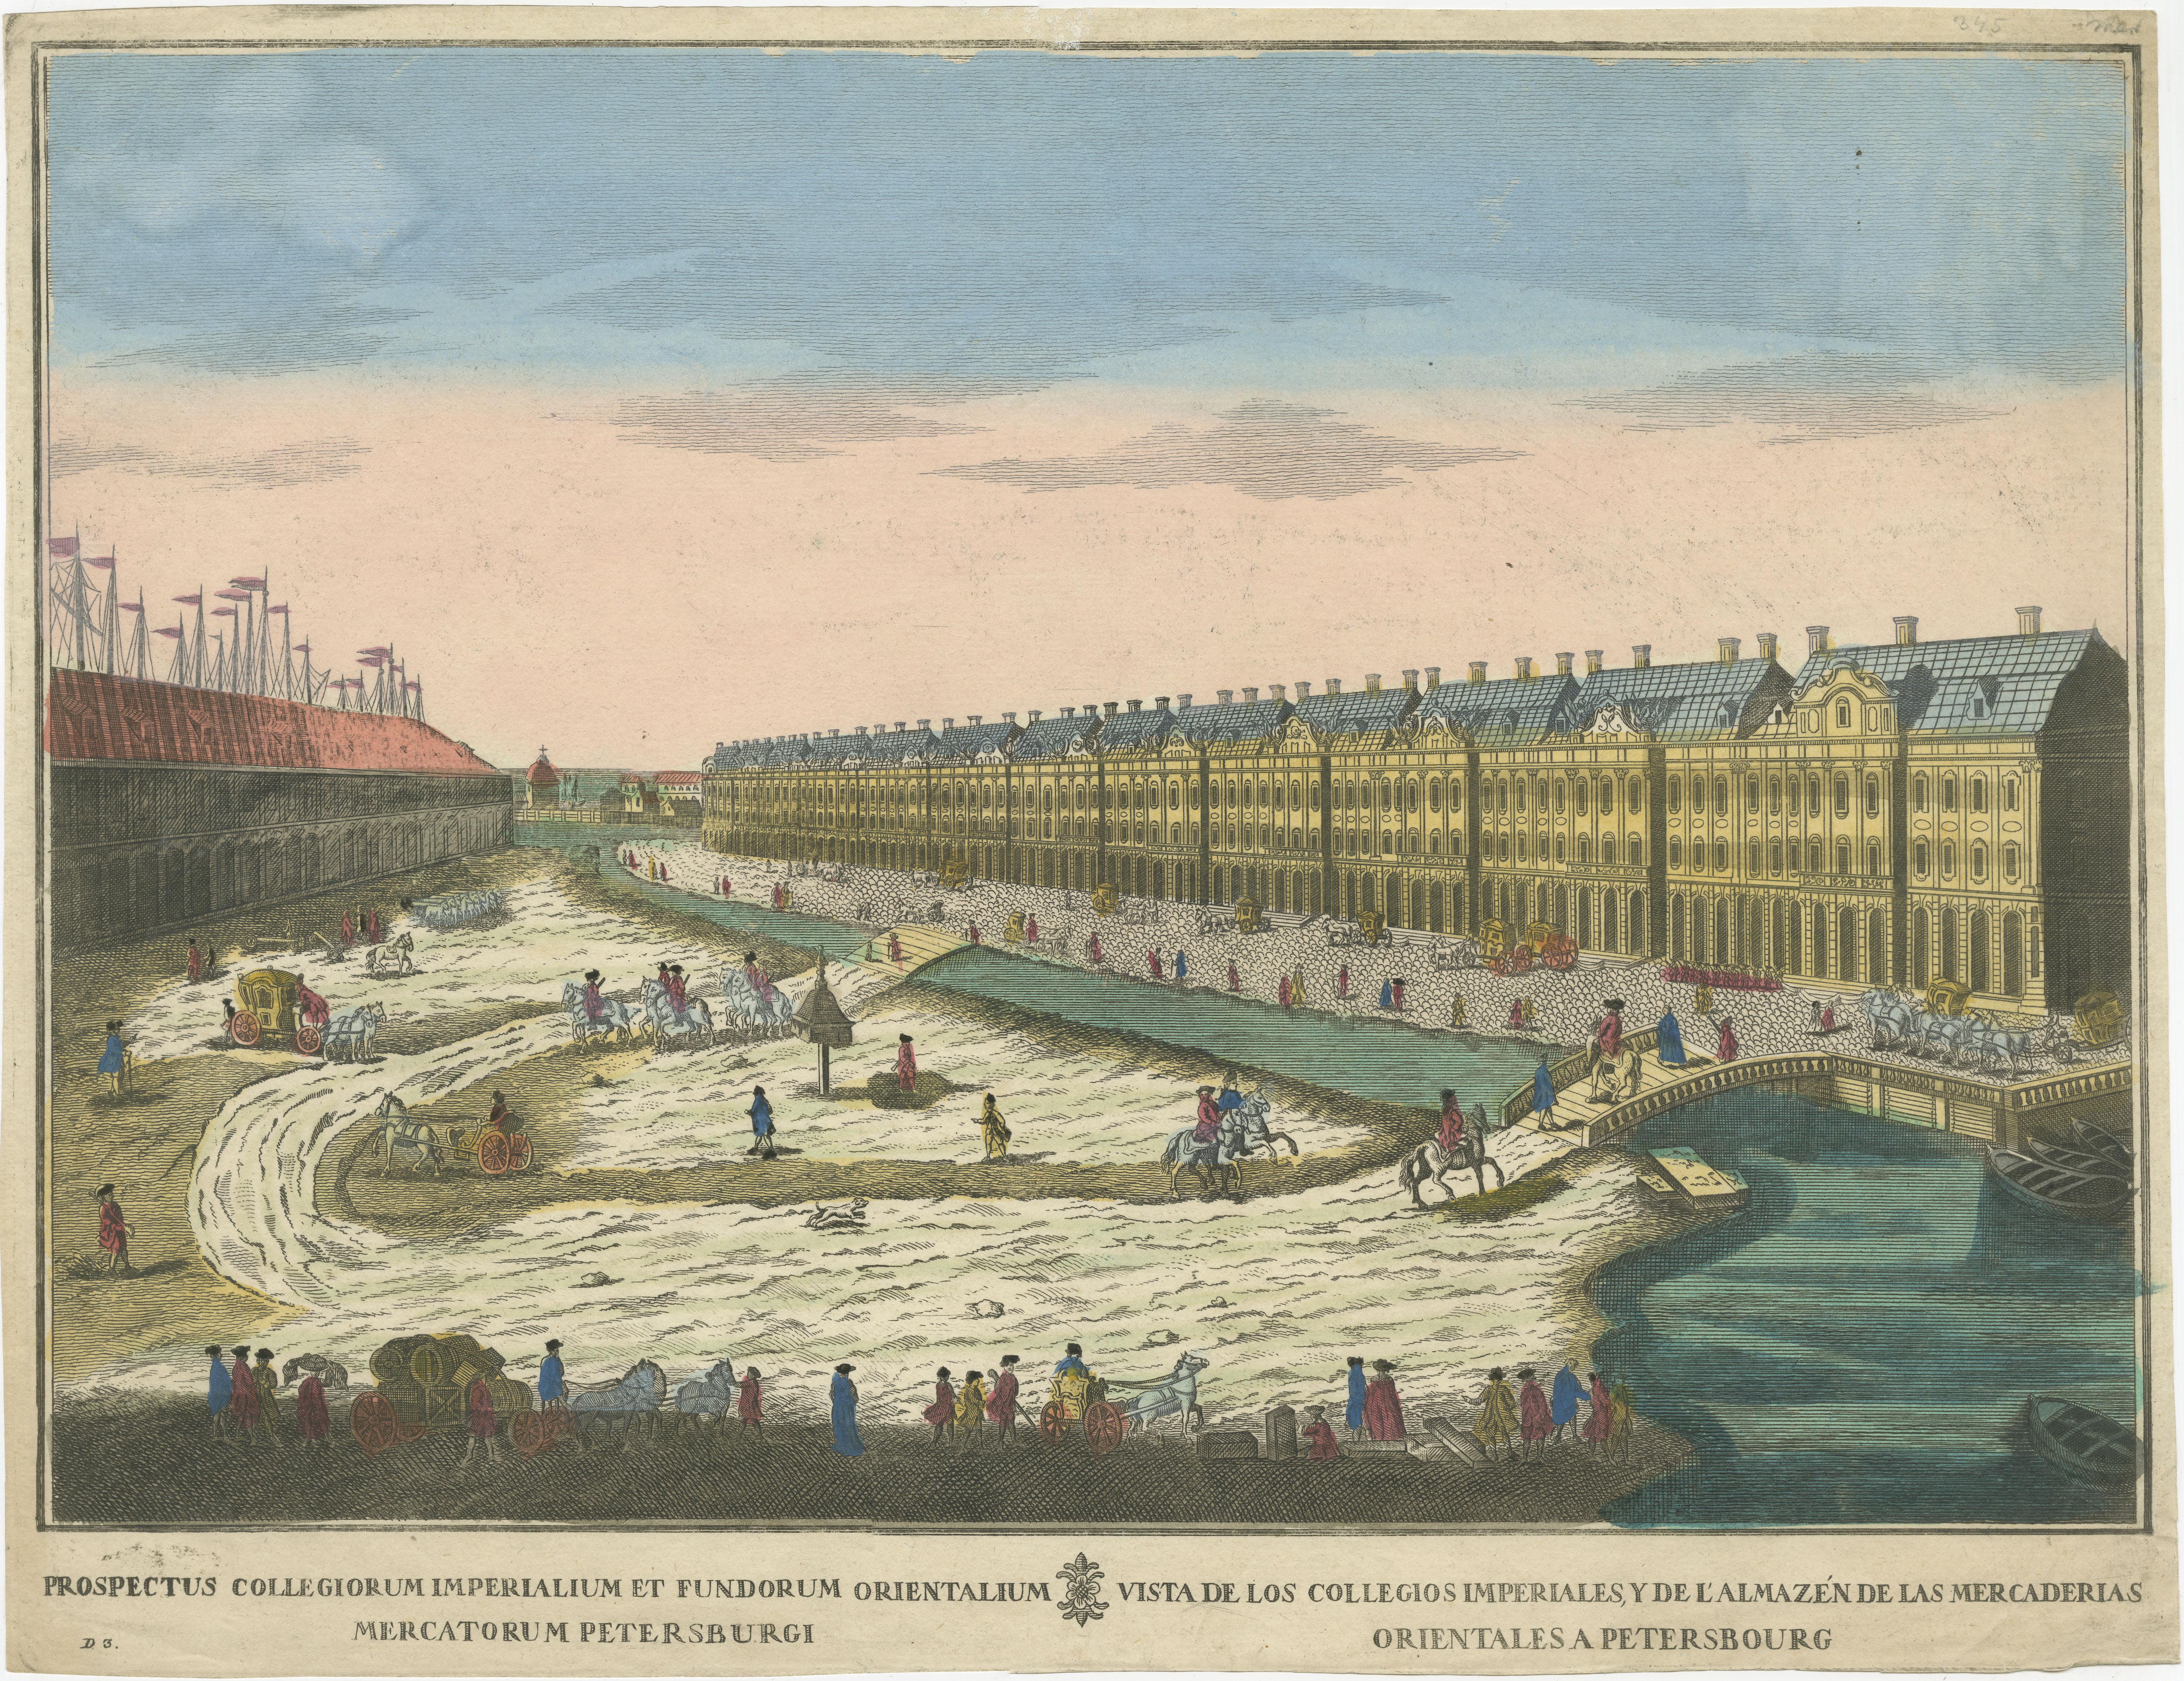 18th Century Optical Print of the Imperial Colleges and Warehouses in St. Petersburg, Russia For Sale